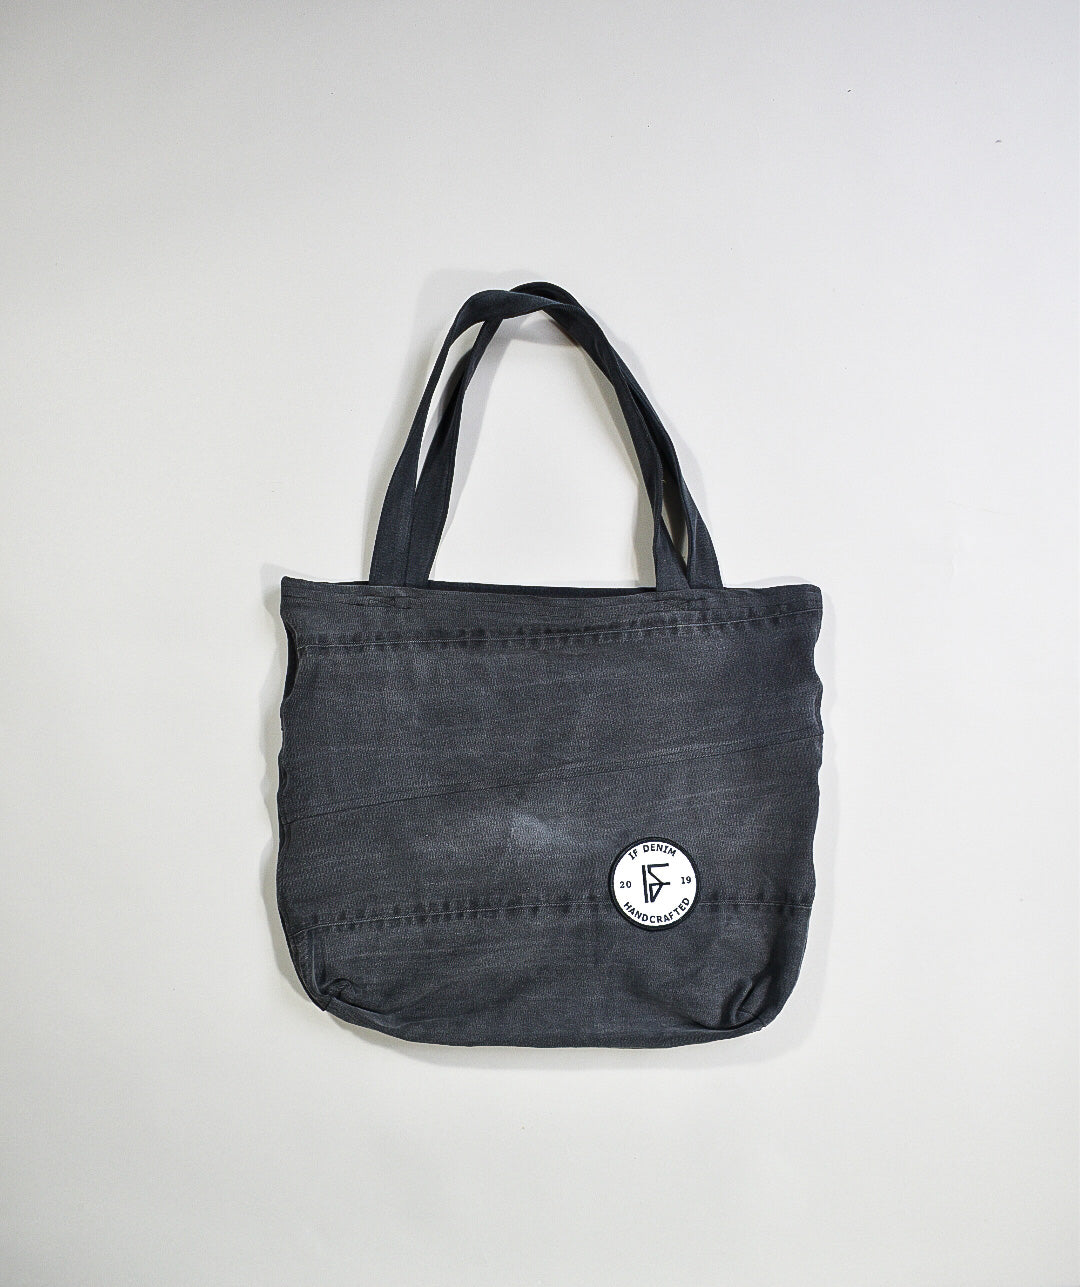 IF DENIM | Sustainable Handcrafted Totebag Worn-out B01